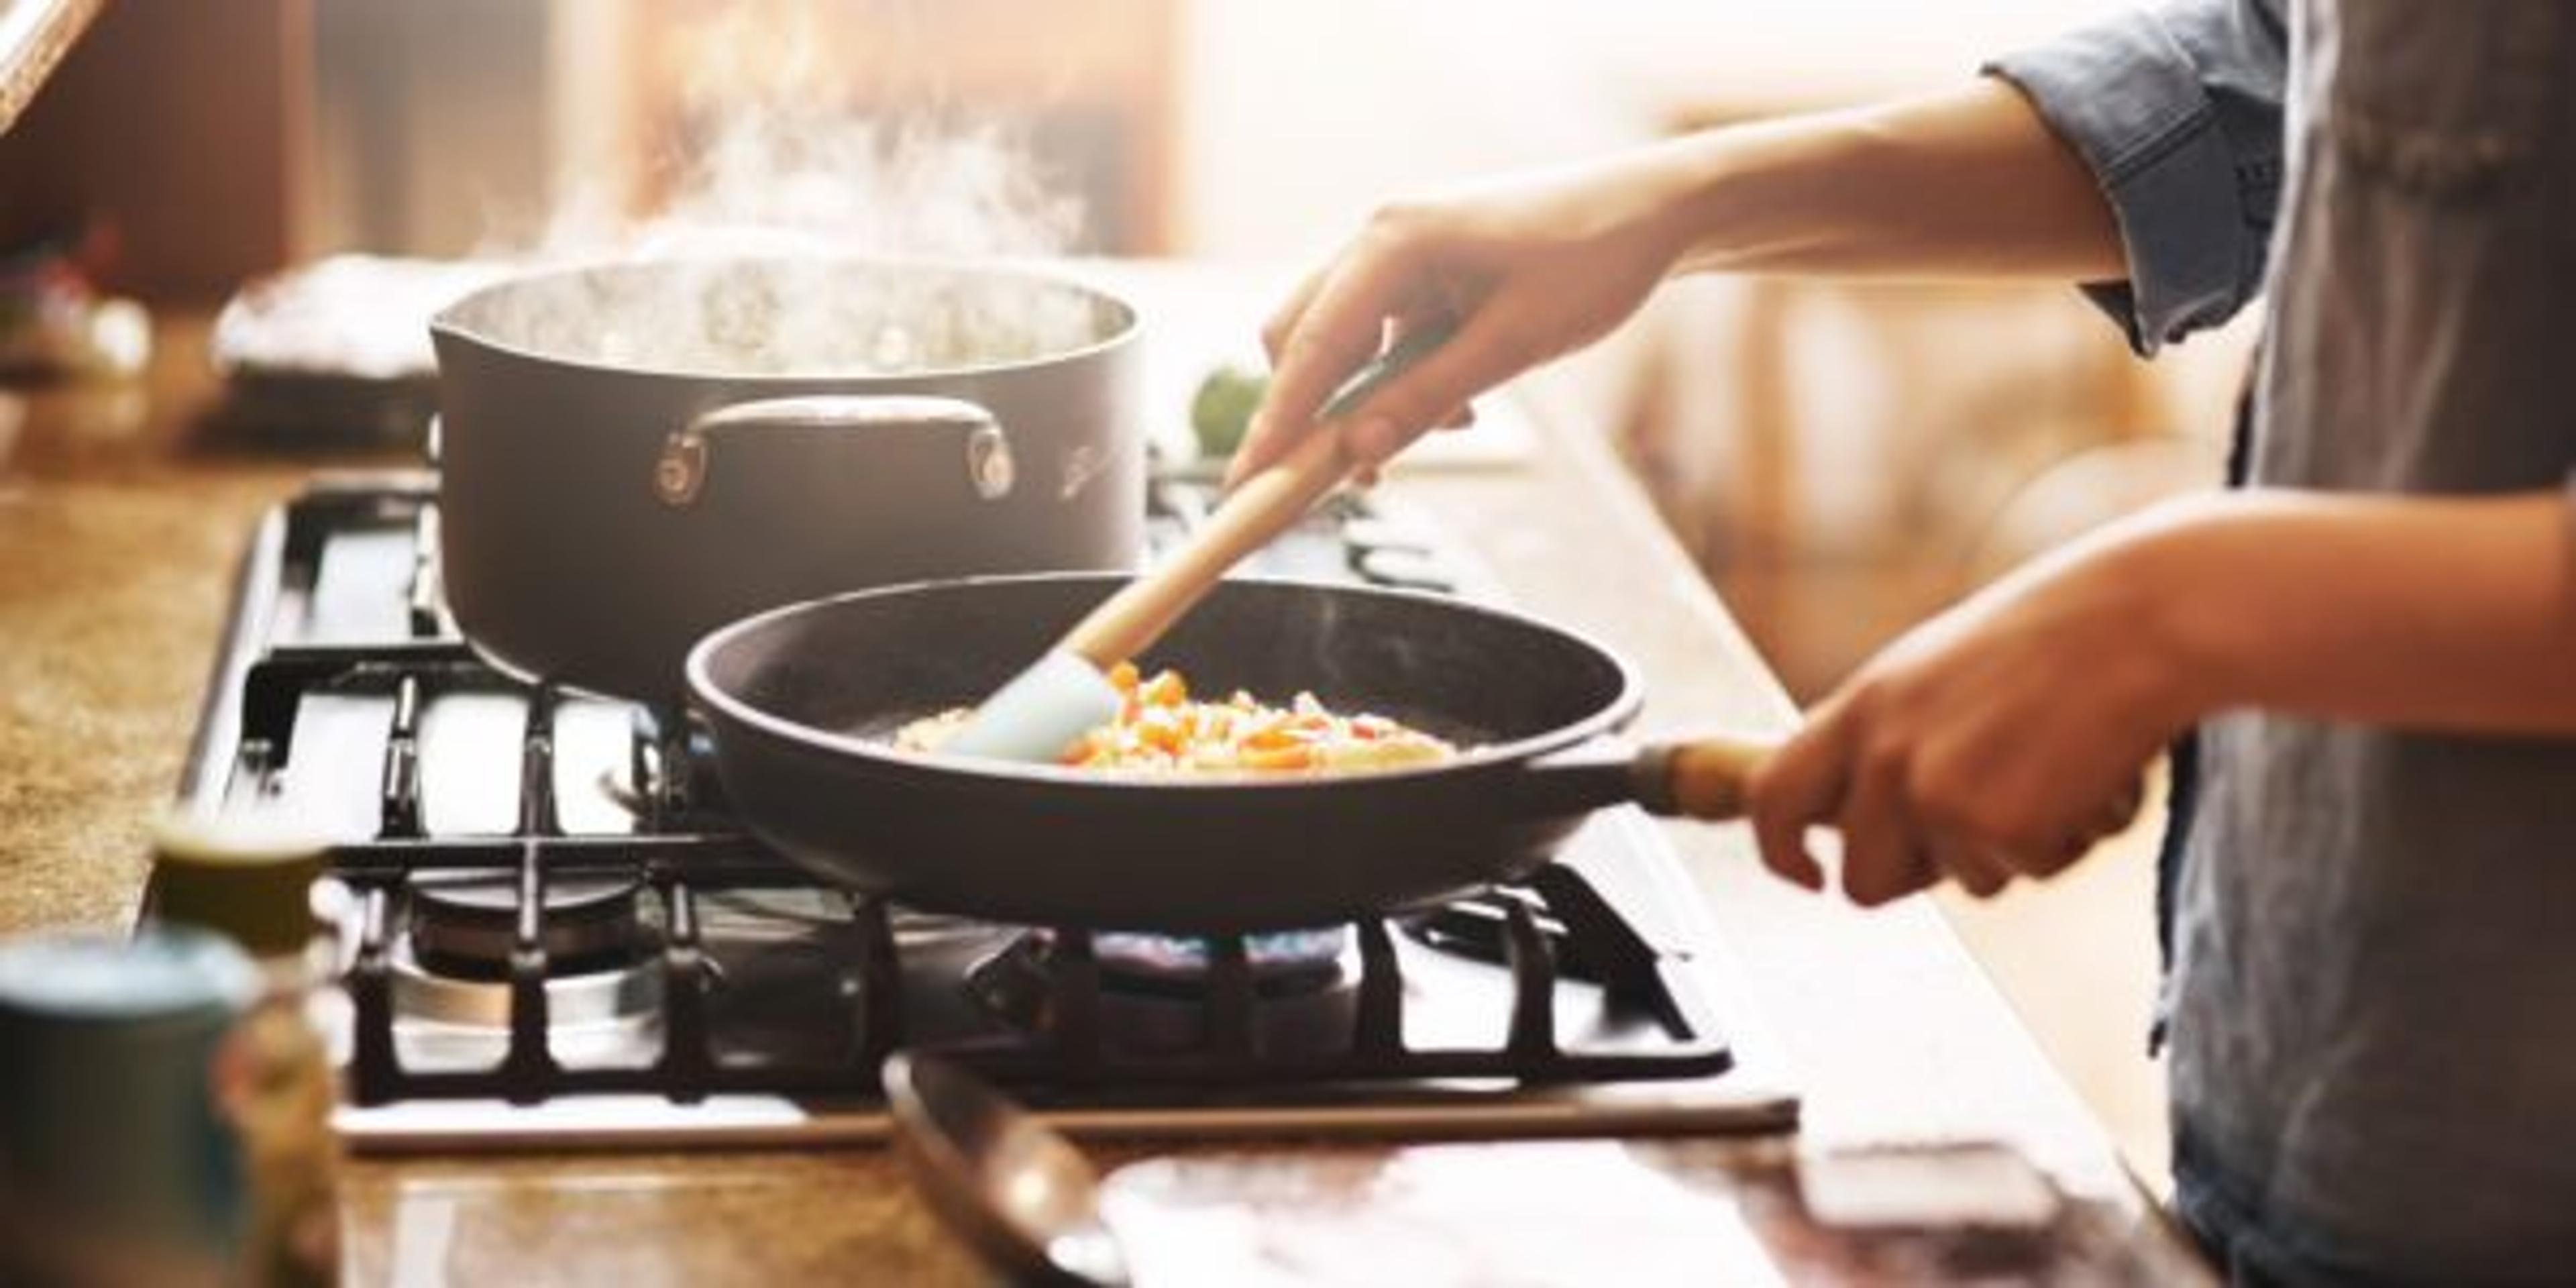 Woman cooks on a non-stick pain on the stove at home